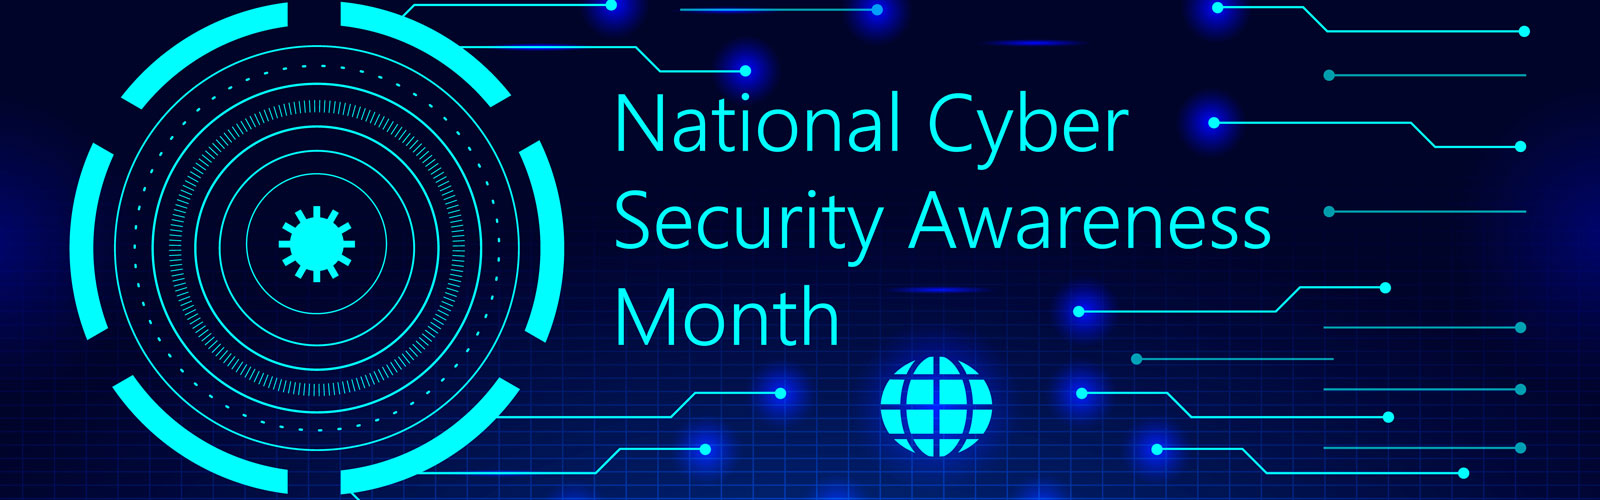 National Cyber Security Awareness Month NCSAM